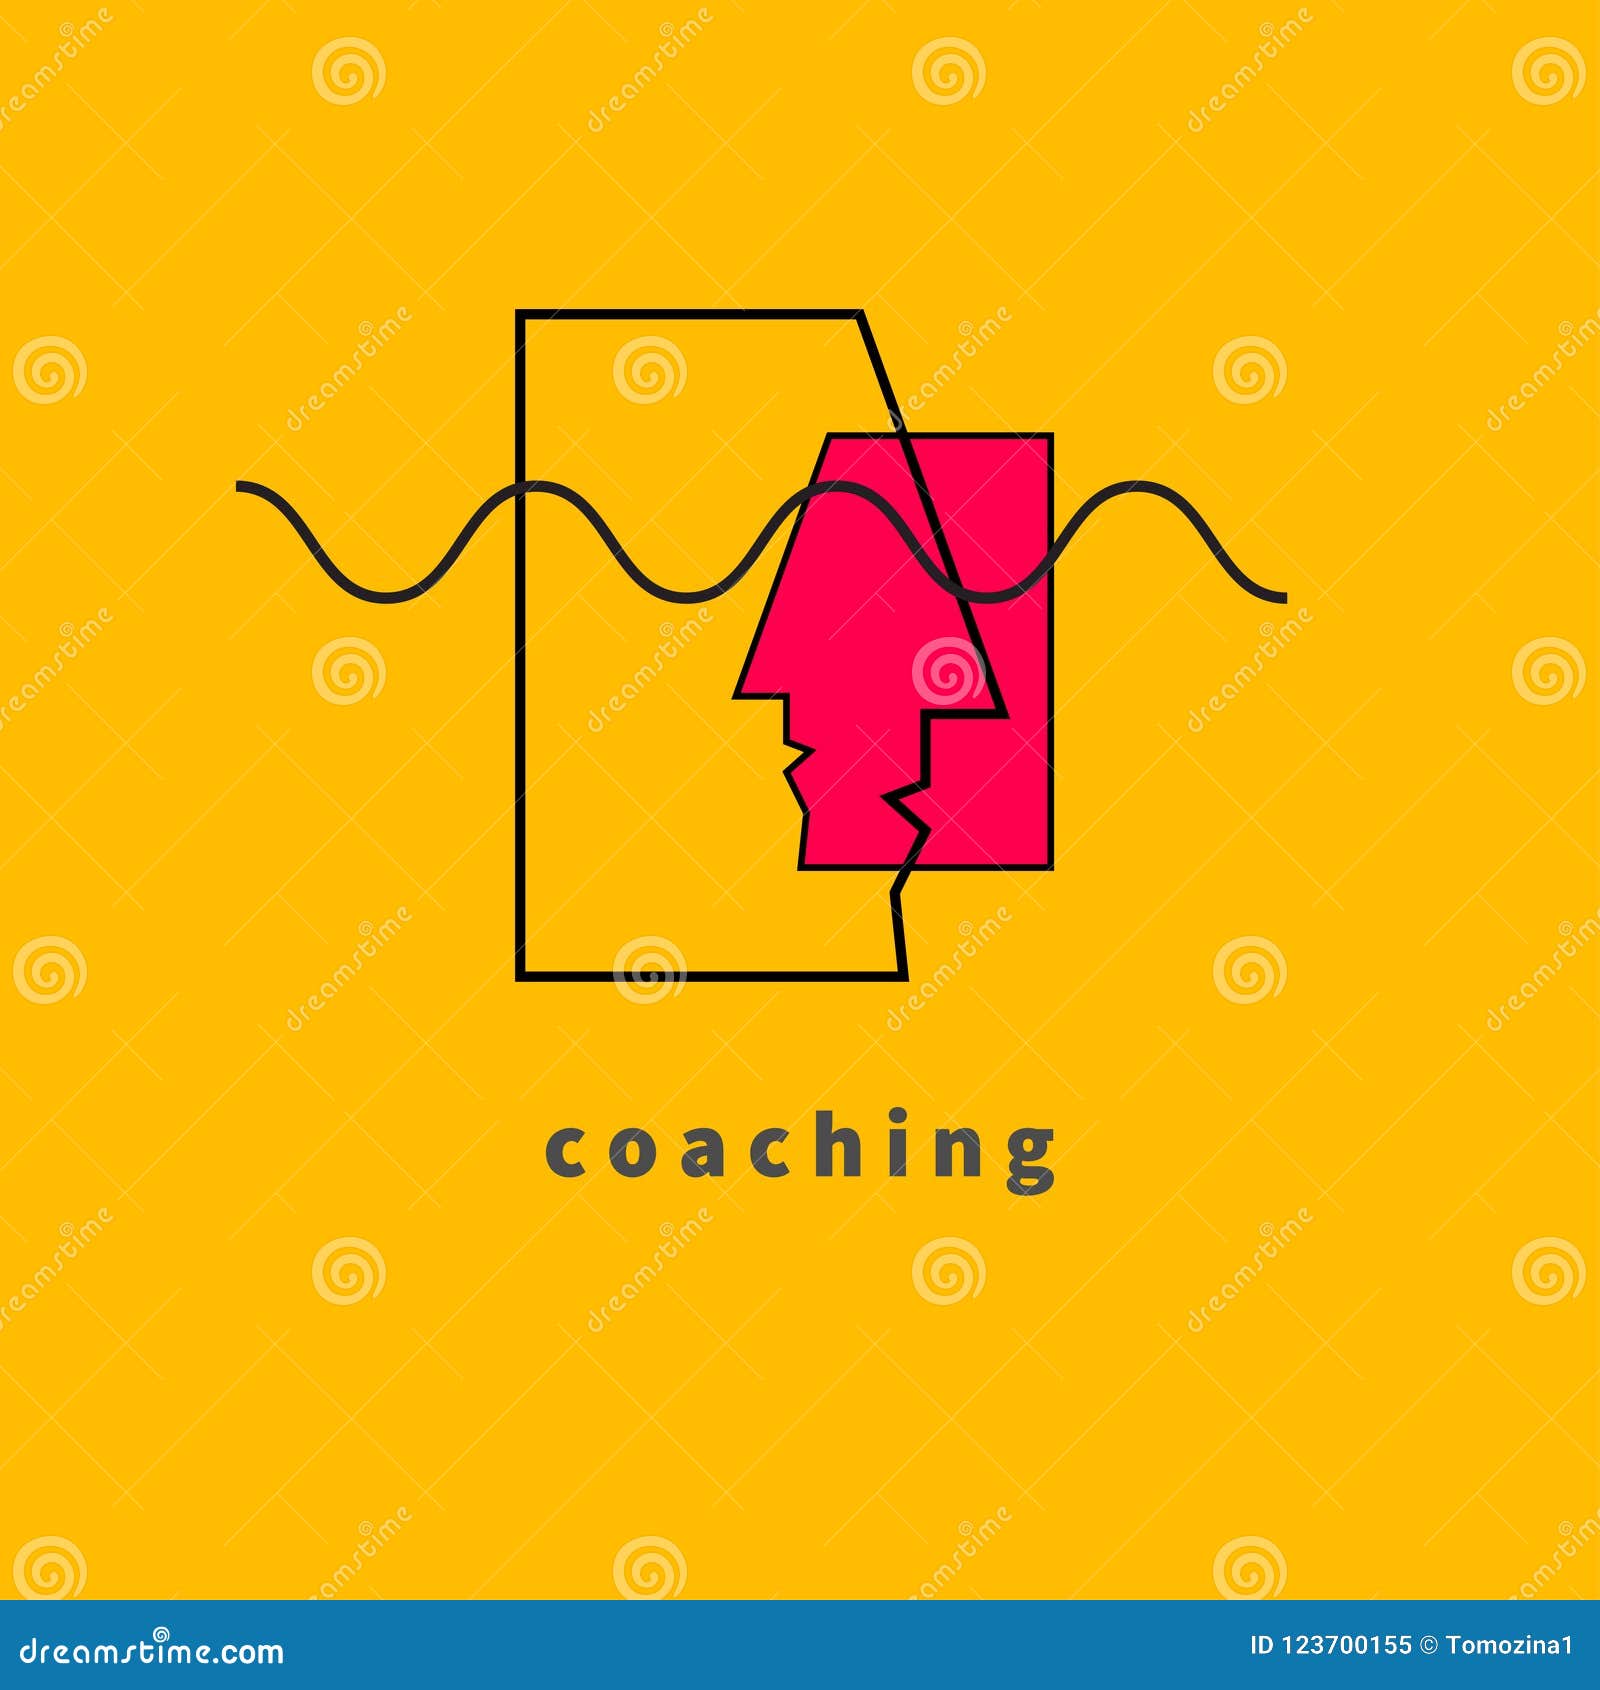 Coaching, coach icon stock vector. Illustration of modern - 123700155